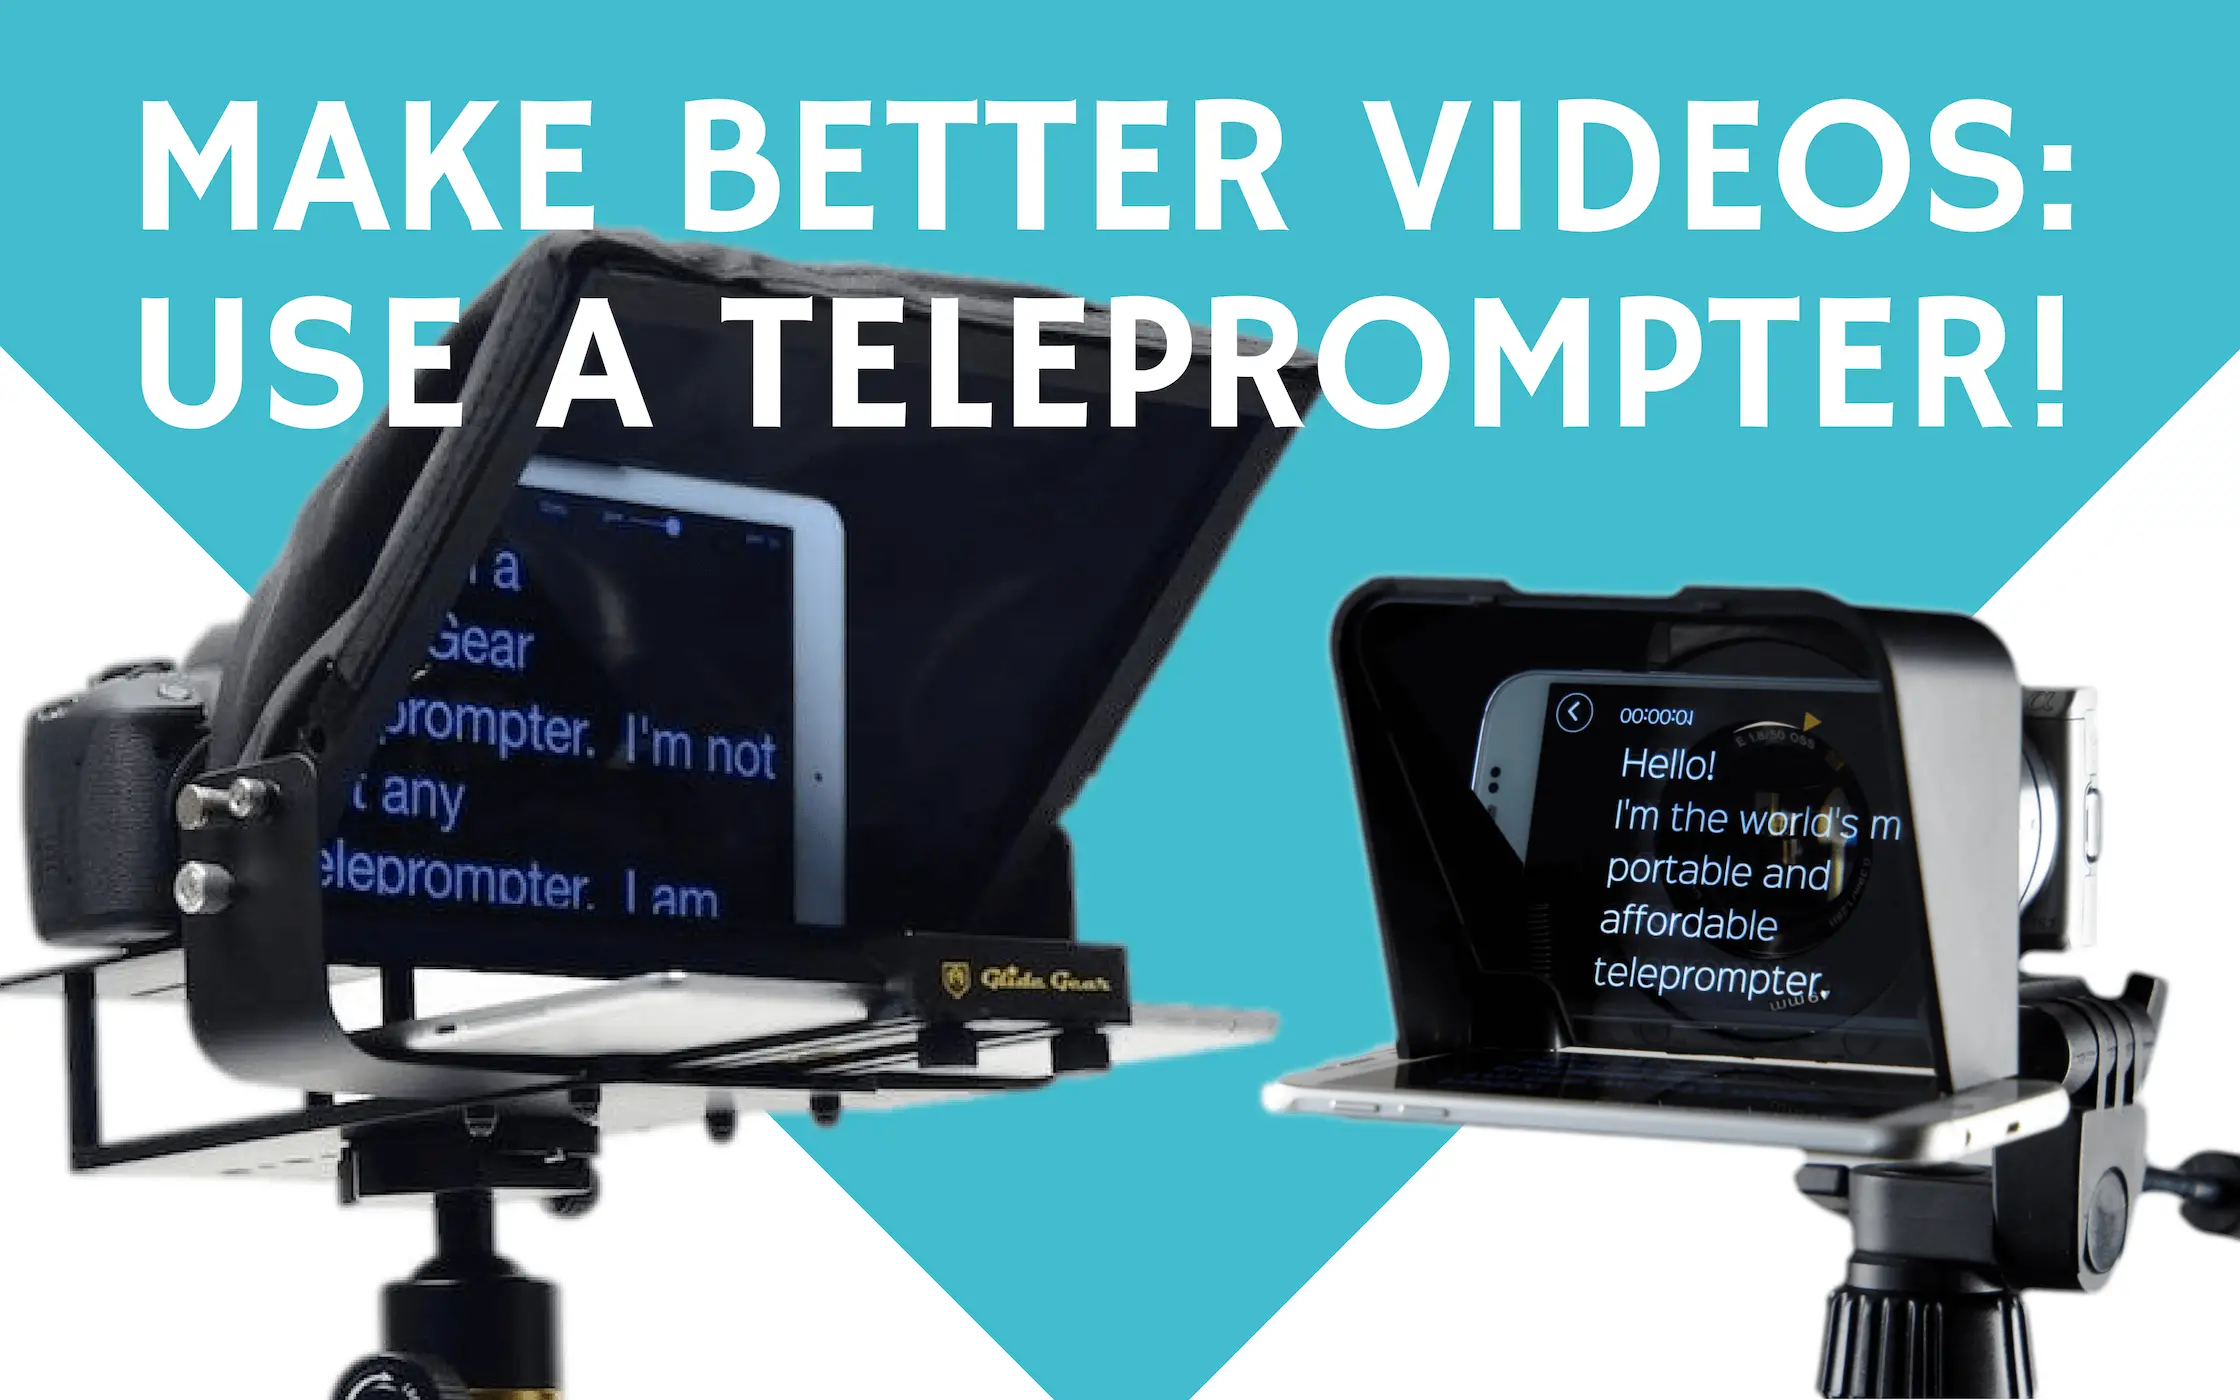 AMBITFUL Teleprompter Kit Portable Inscriber Mobile Phone Teleprompter Artifact Video with Remote Control for Phone and DSLR Recording